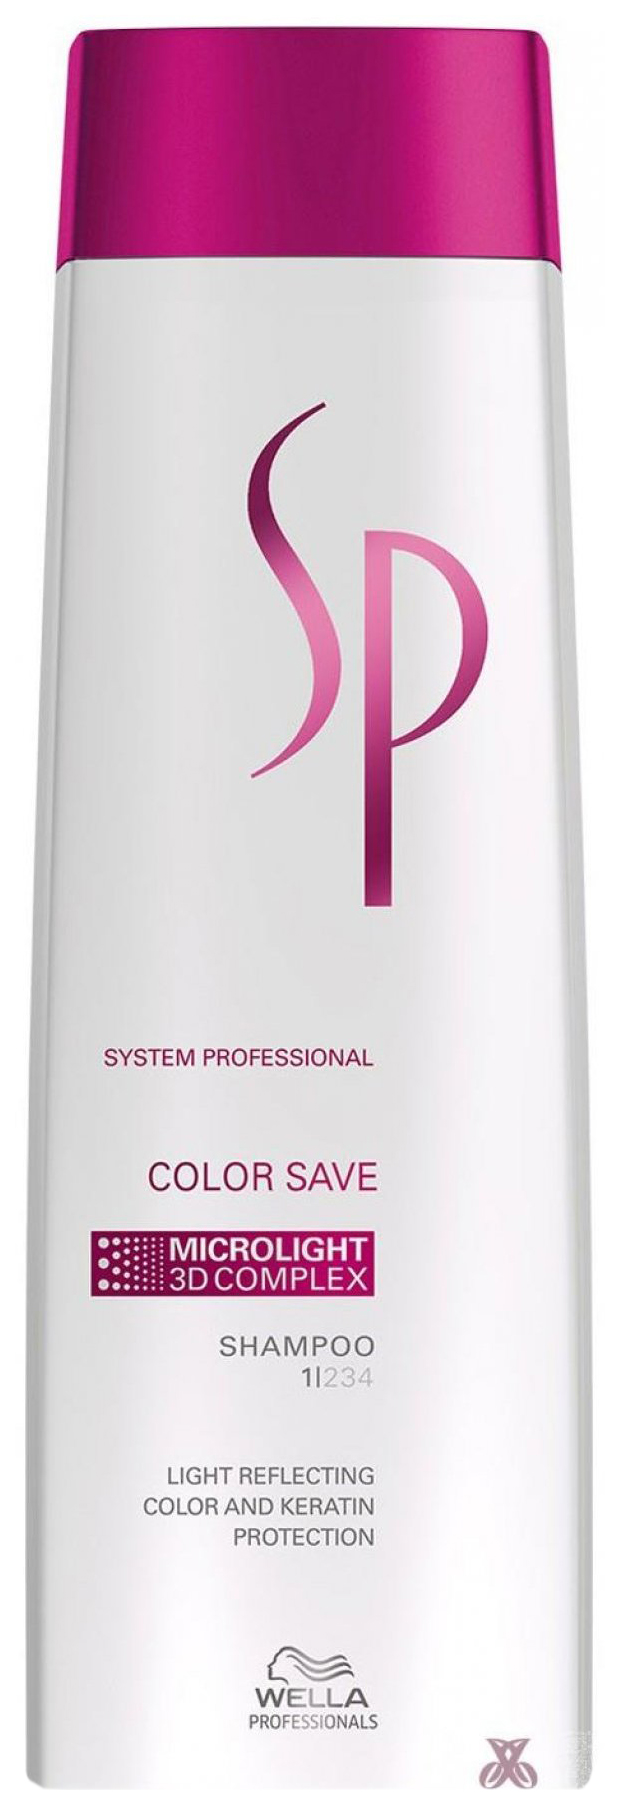 Шампунь Wella System Professional Color Save 250 мл atkinsons oud save the queen 100